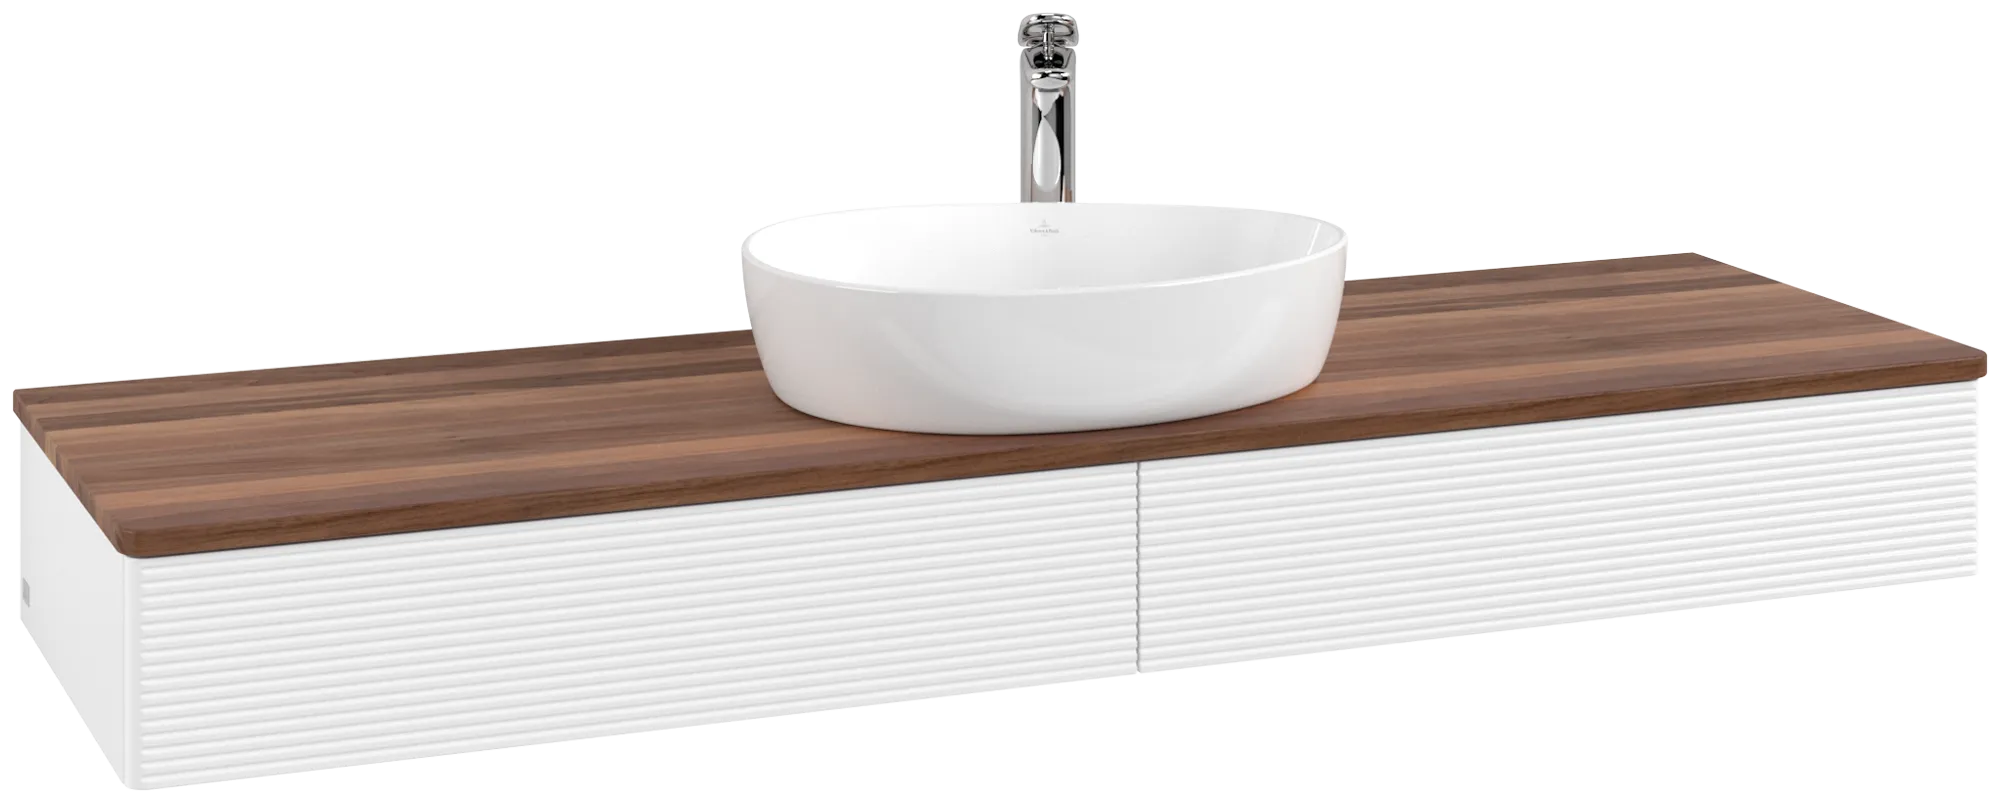 Picture of VILLEROY BOCH Antao Vanity unit, with lighting, 2 pull-out compartments, 1600 x 190 x 500 mm, Front with grain texture, White Matt Lacquer / Warm Walnut #L14152MT